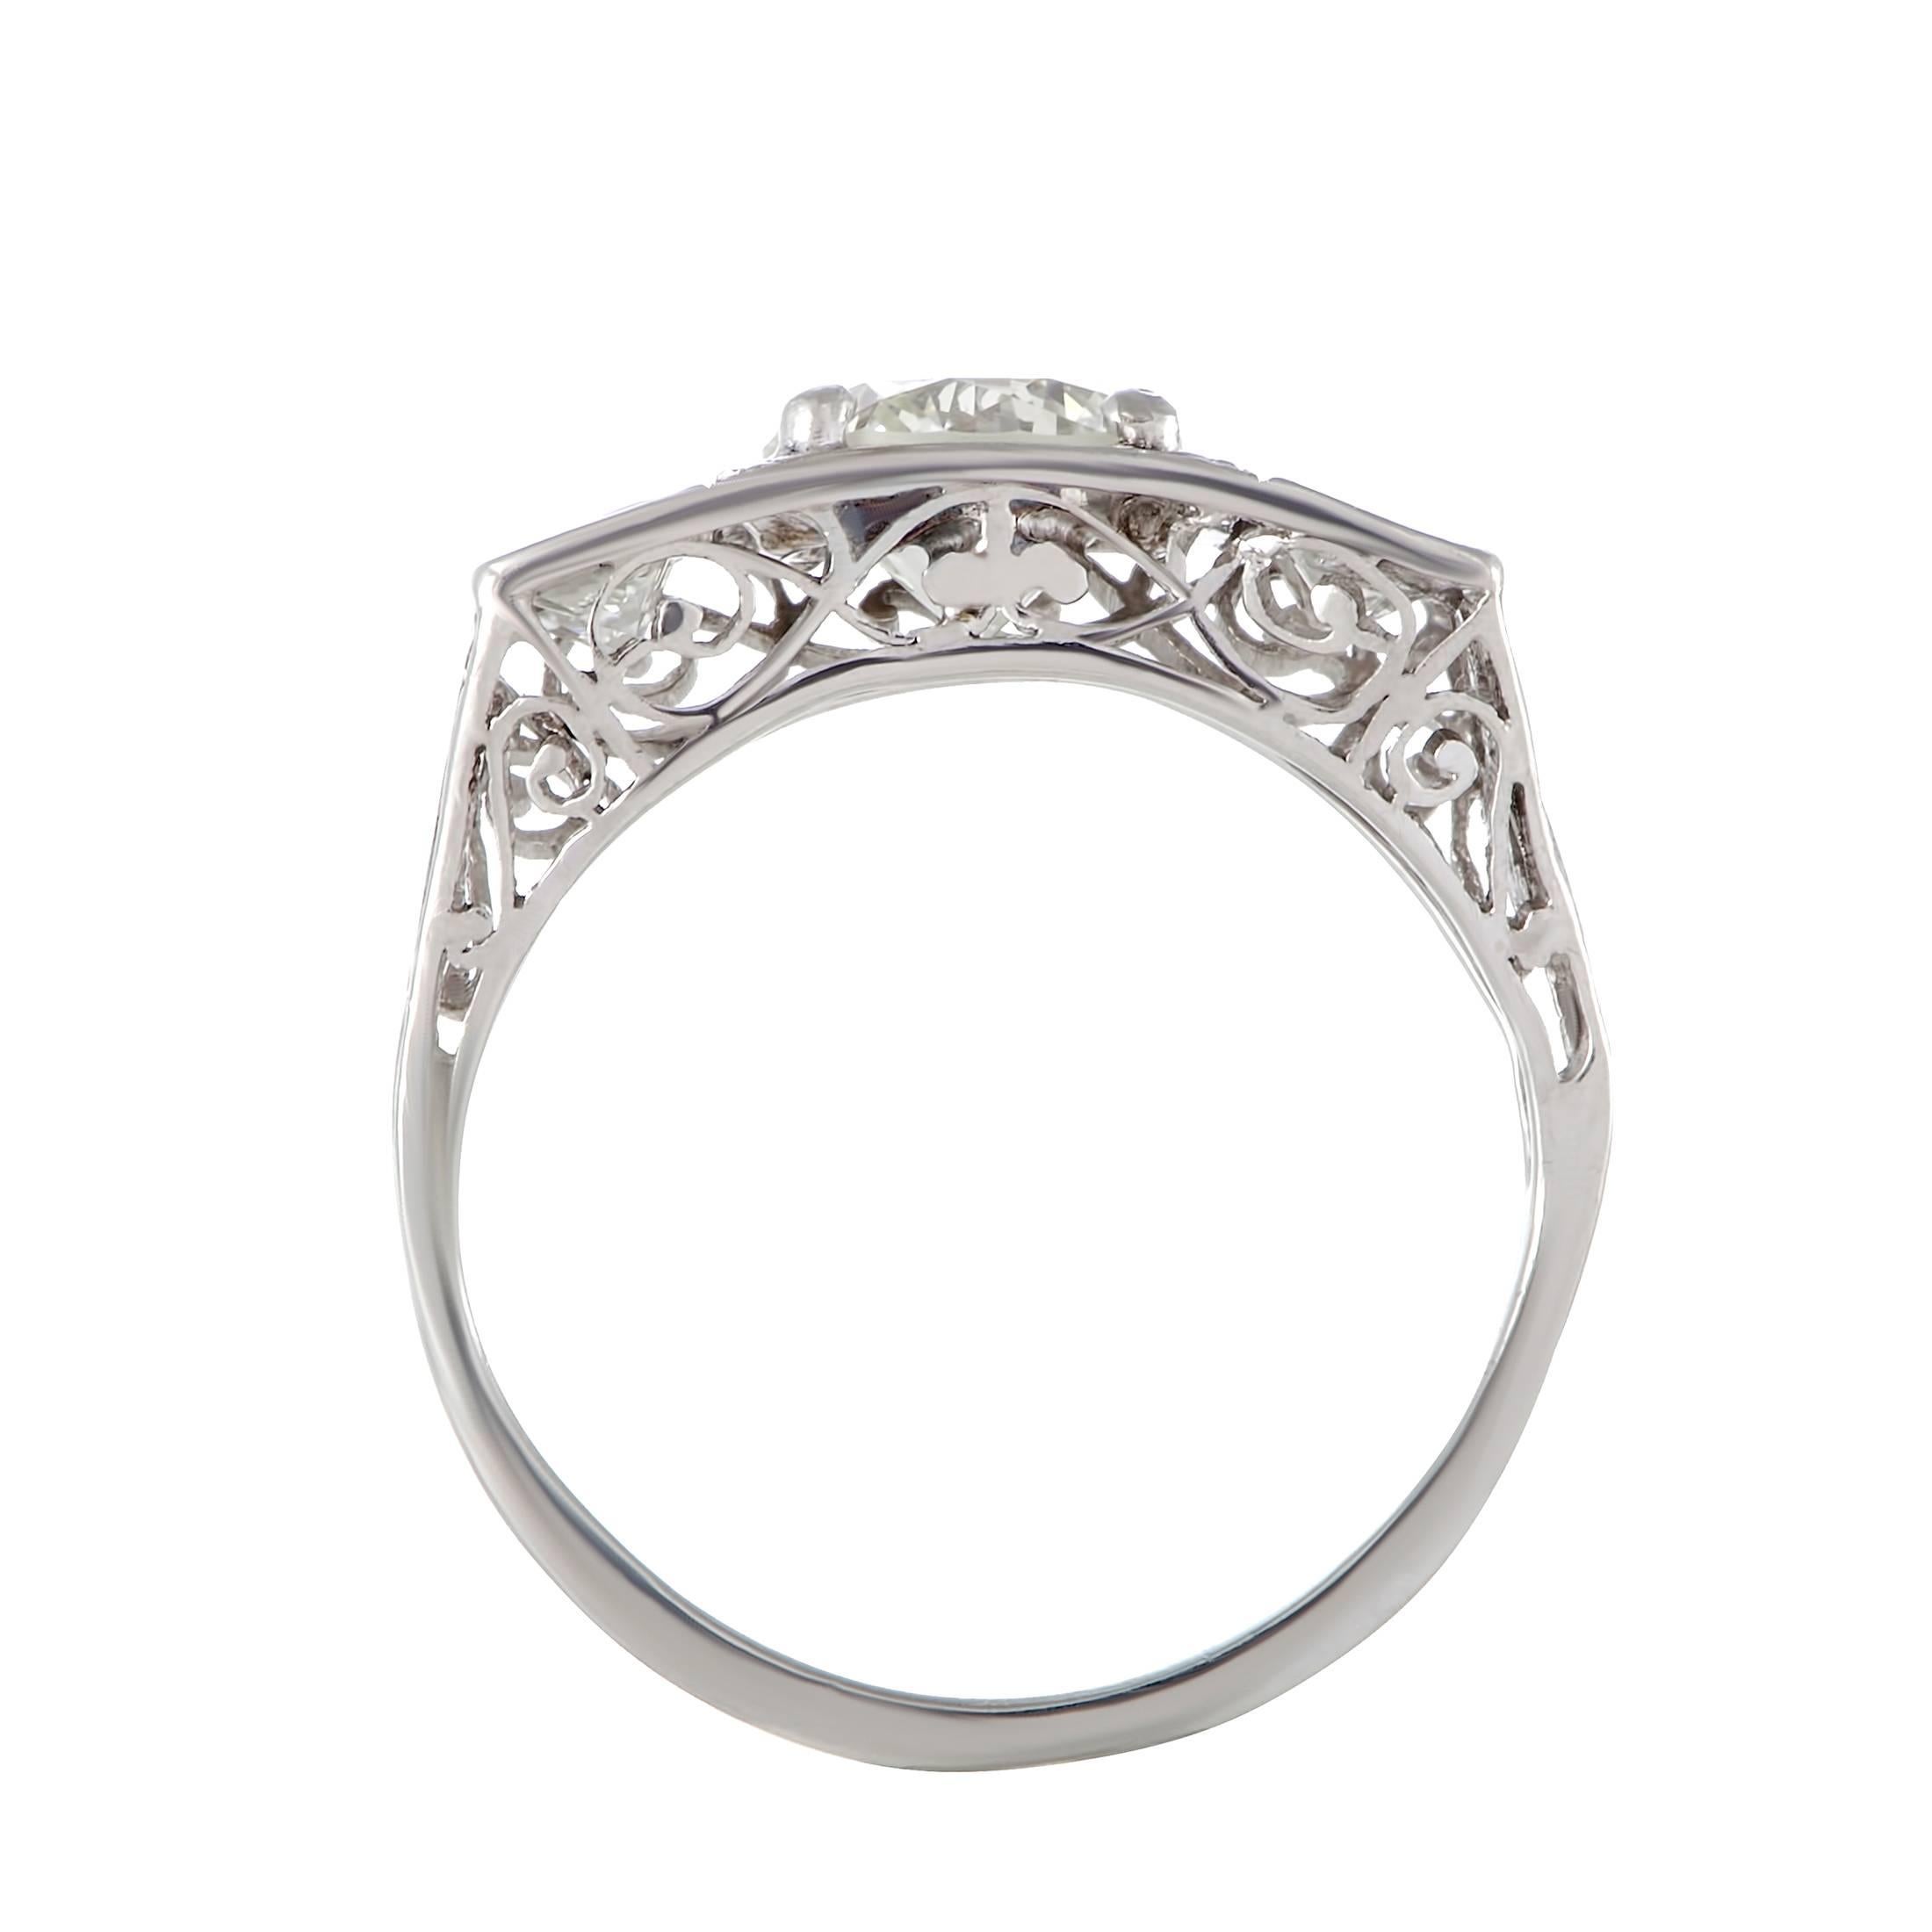 Alluringly intricate design and spectacular décor create a spellbinding effect in this stunning ring made of prestigious platinum that offers sublime elegant look. The ring is set with a gorgeous center diamond of K-color and VS1 clarity weighing